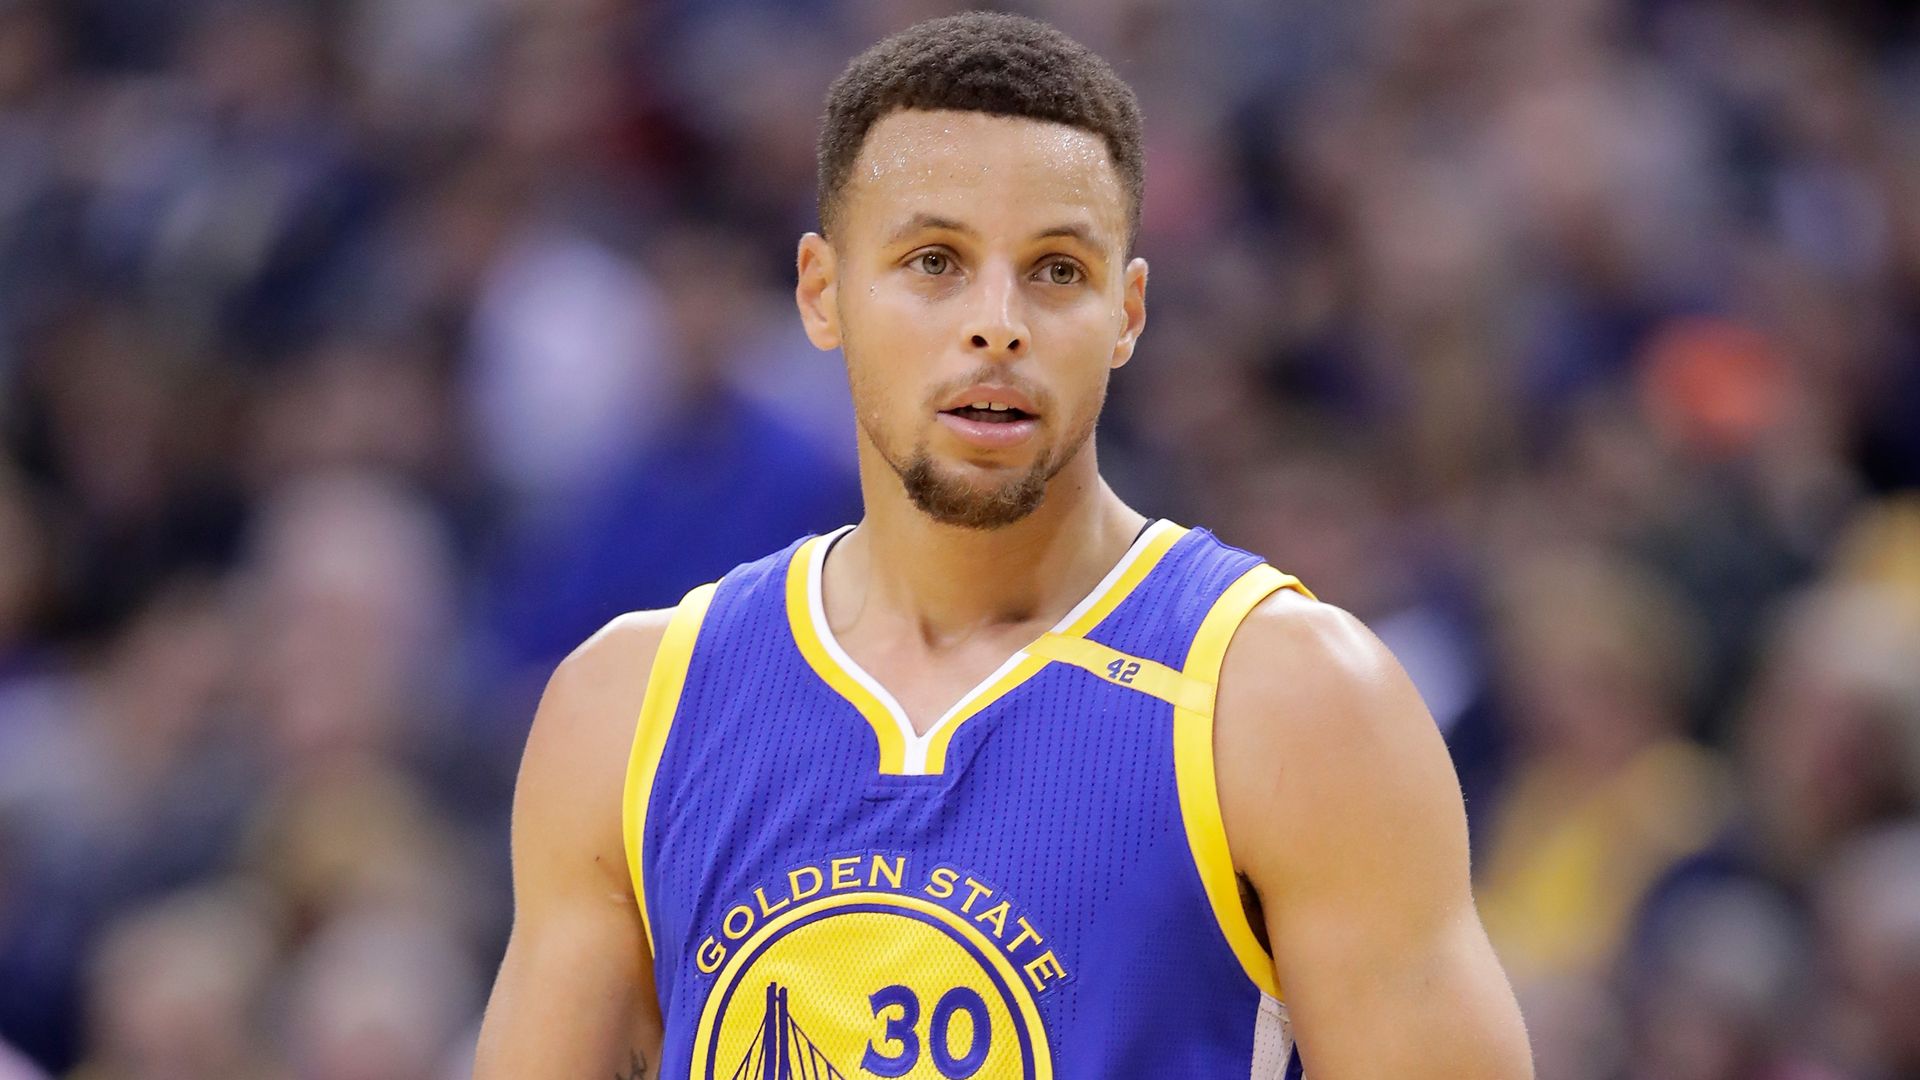 What Ethnicity is Stephen Curry?